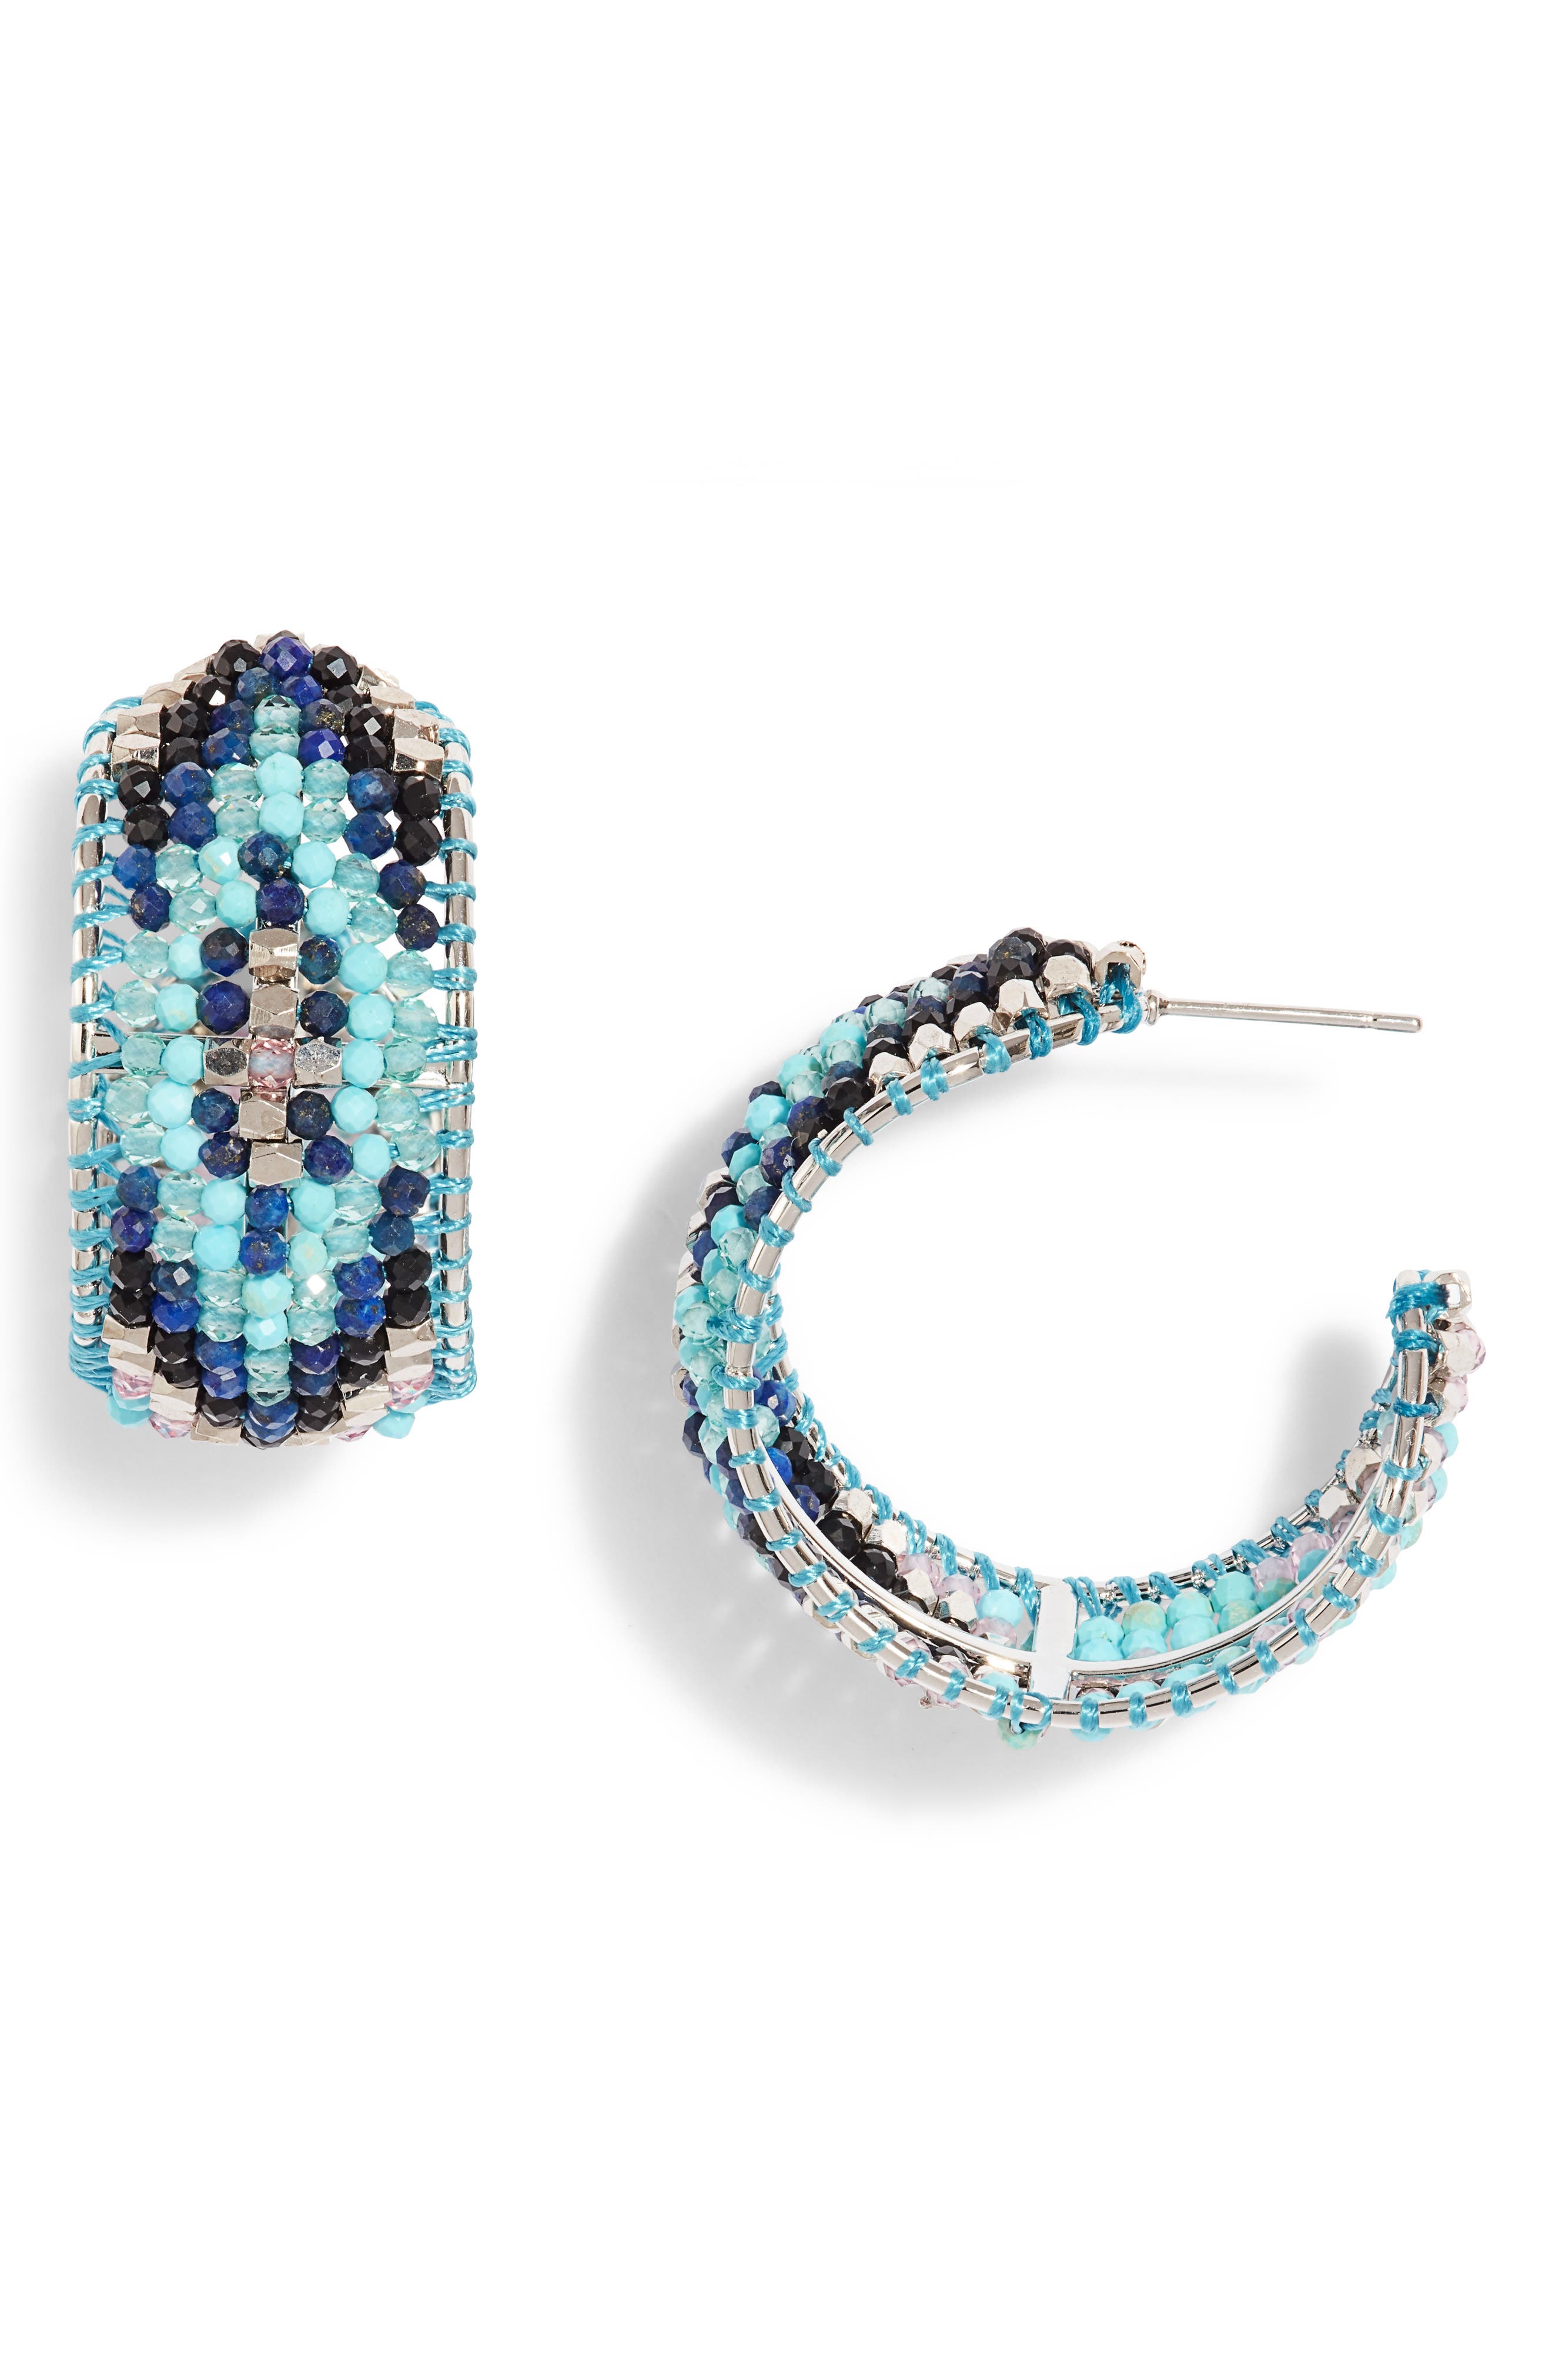 Blue & Green Colored Metal Hoop-Earrings With Bead Accents #LQE4218